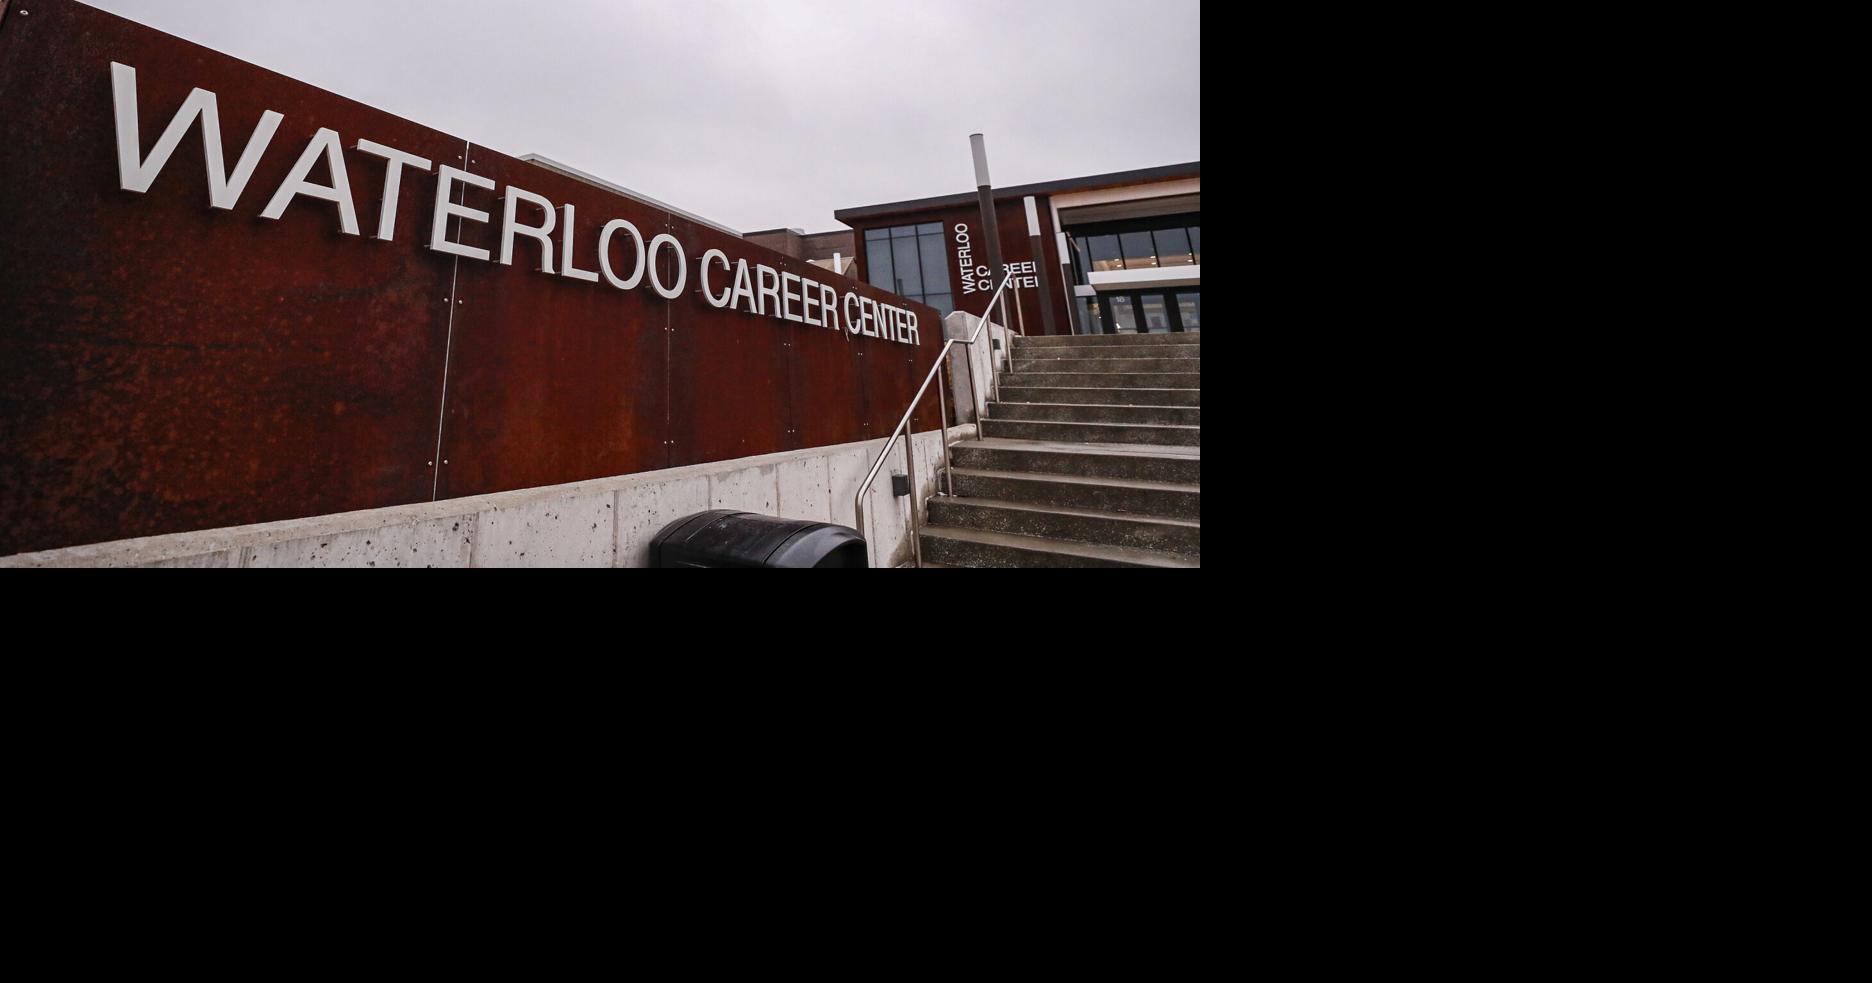 Waterloo school board to discuss proposed career center programs Photo